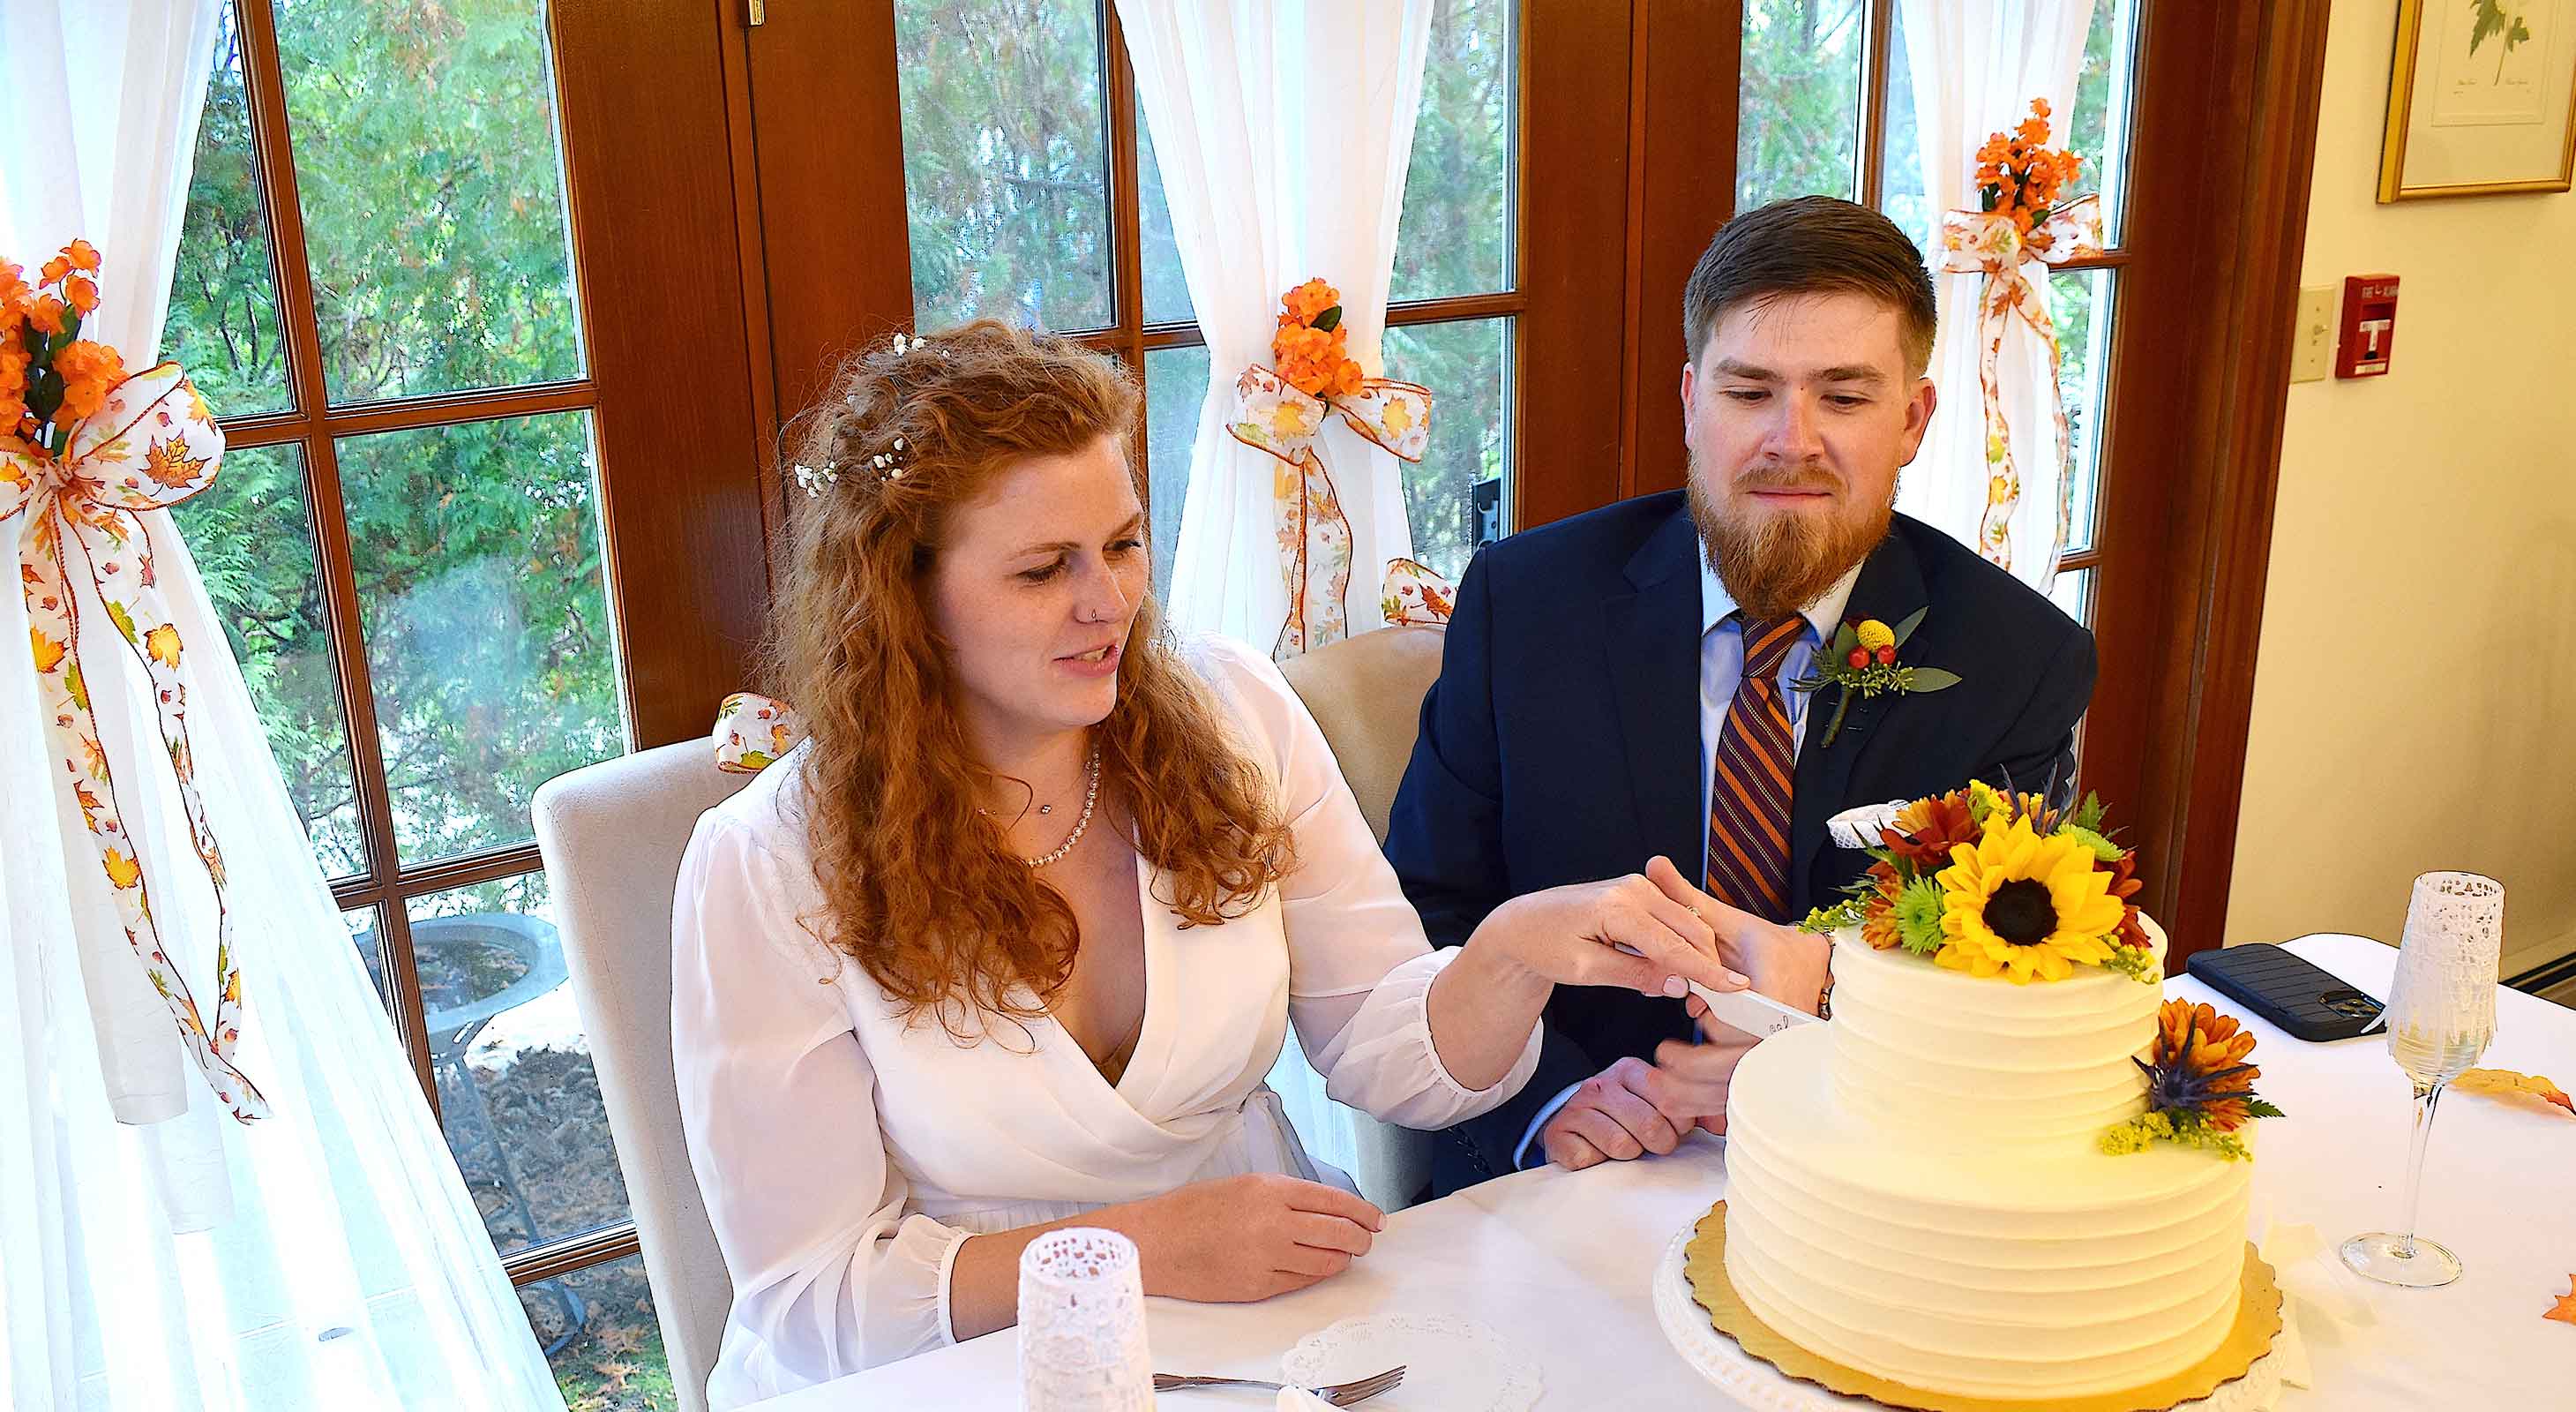 Bride and groom cutting wedding cake decorated with fall flowers during their Cape Cod elopement